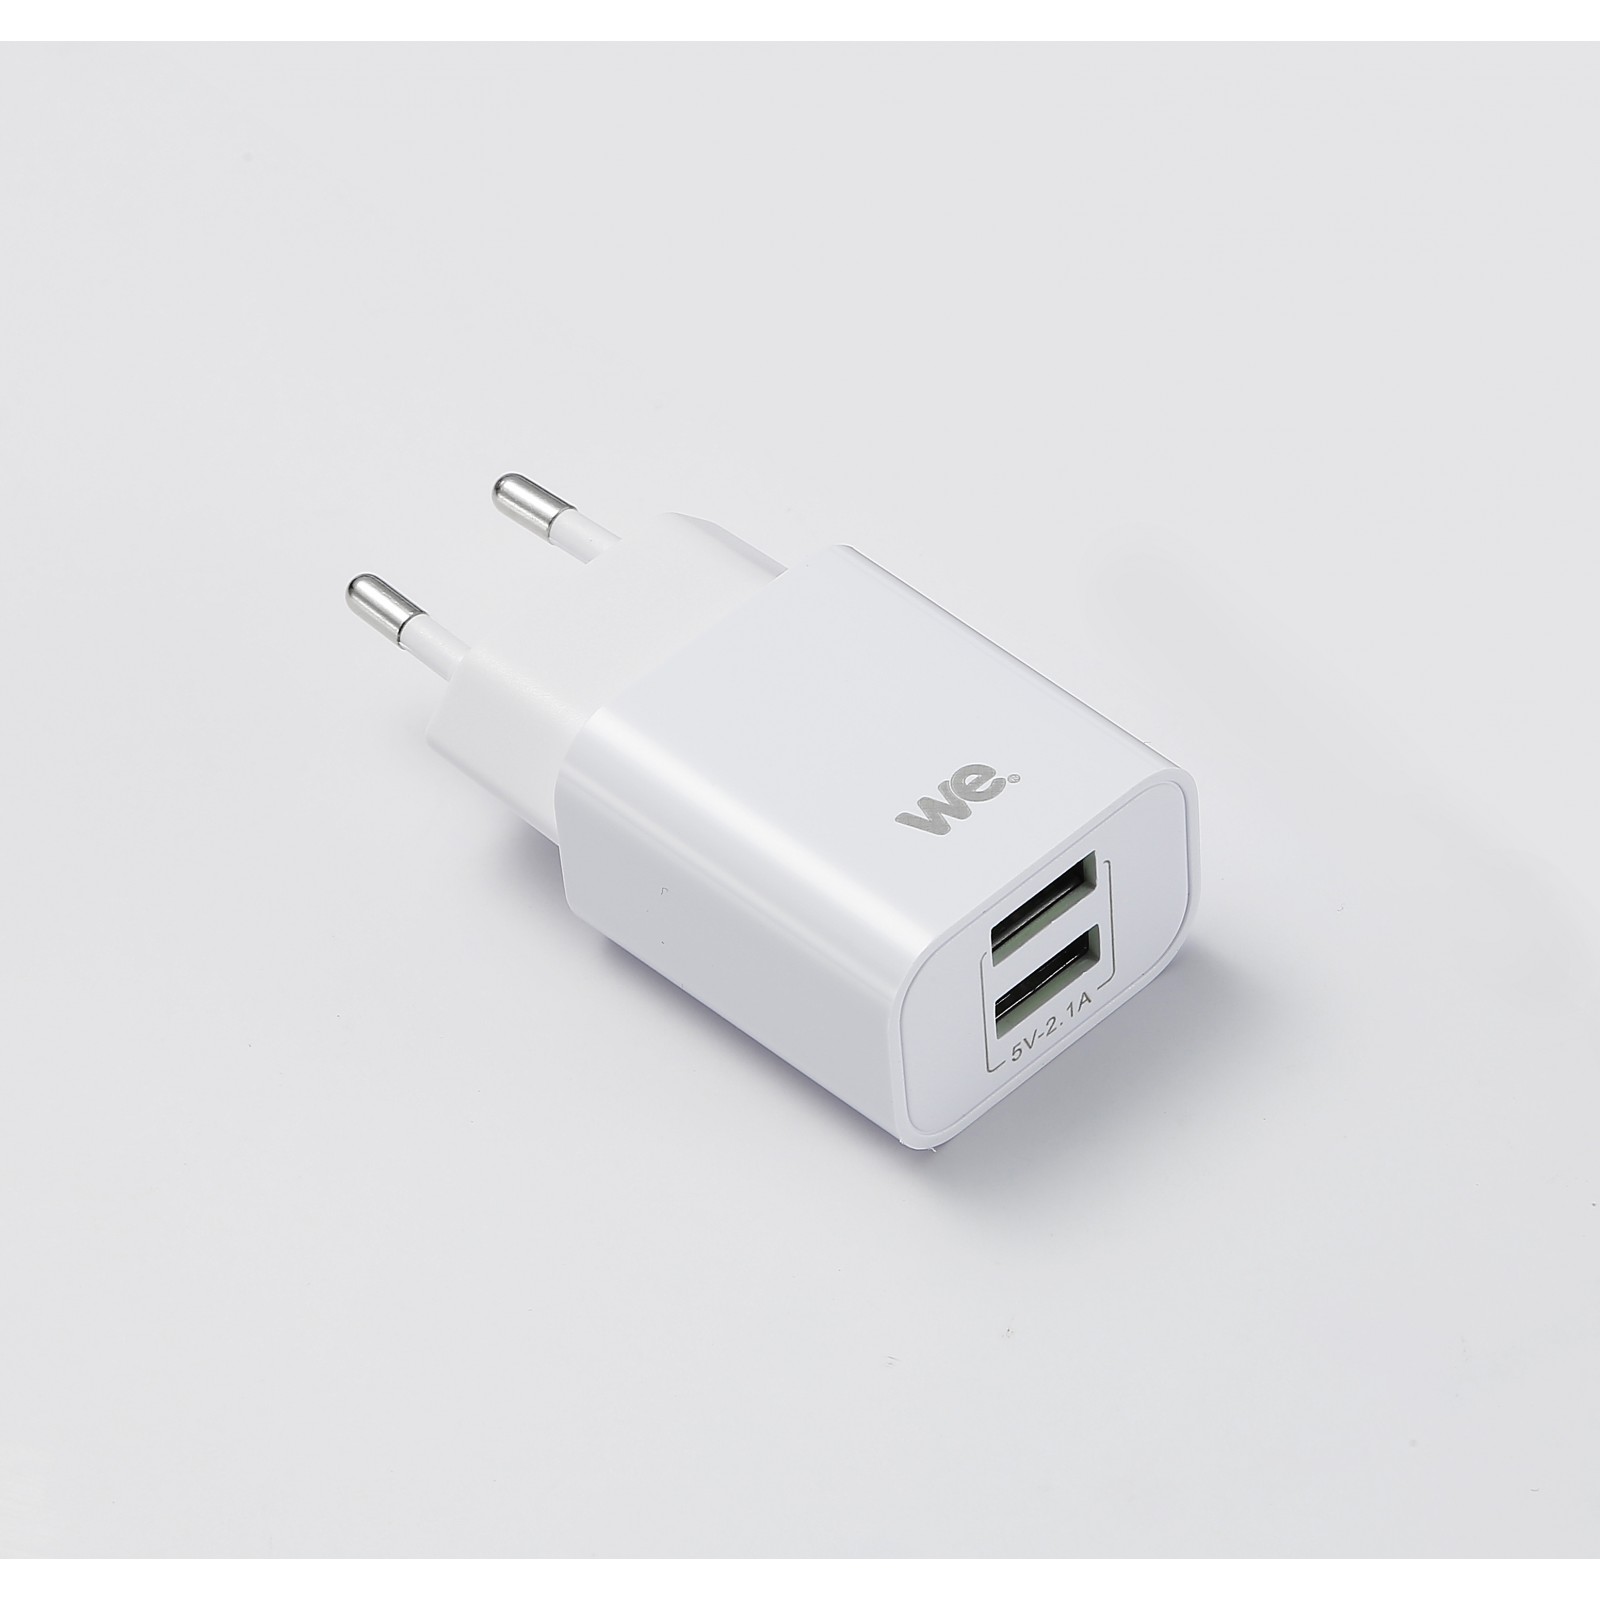 Chargeur secteur WE 2 Ports USB-A Chargeur Mural (5V/2.1A Max). BLANC  Adaptateur USB Universel pour Apple iOS, Android, Huawe